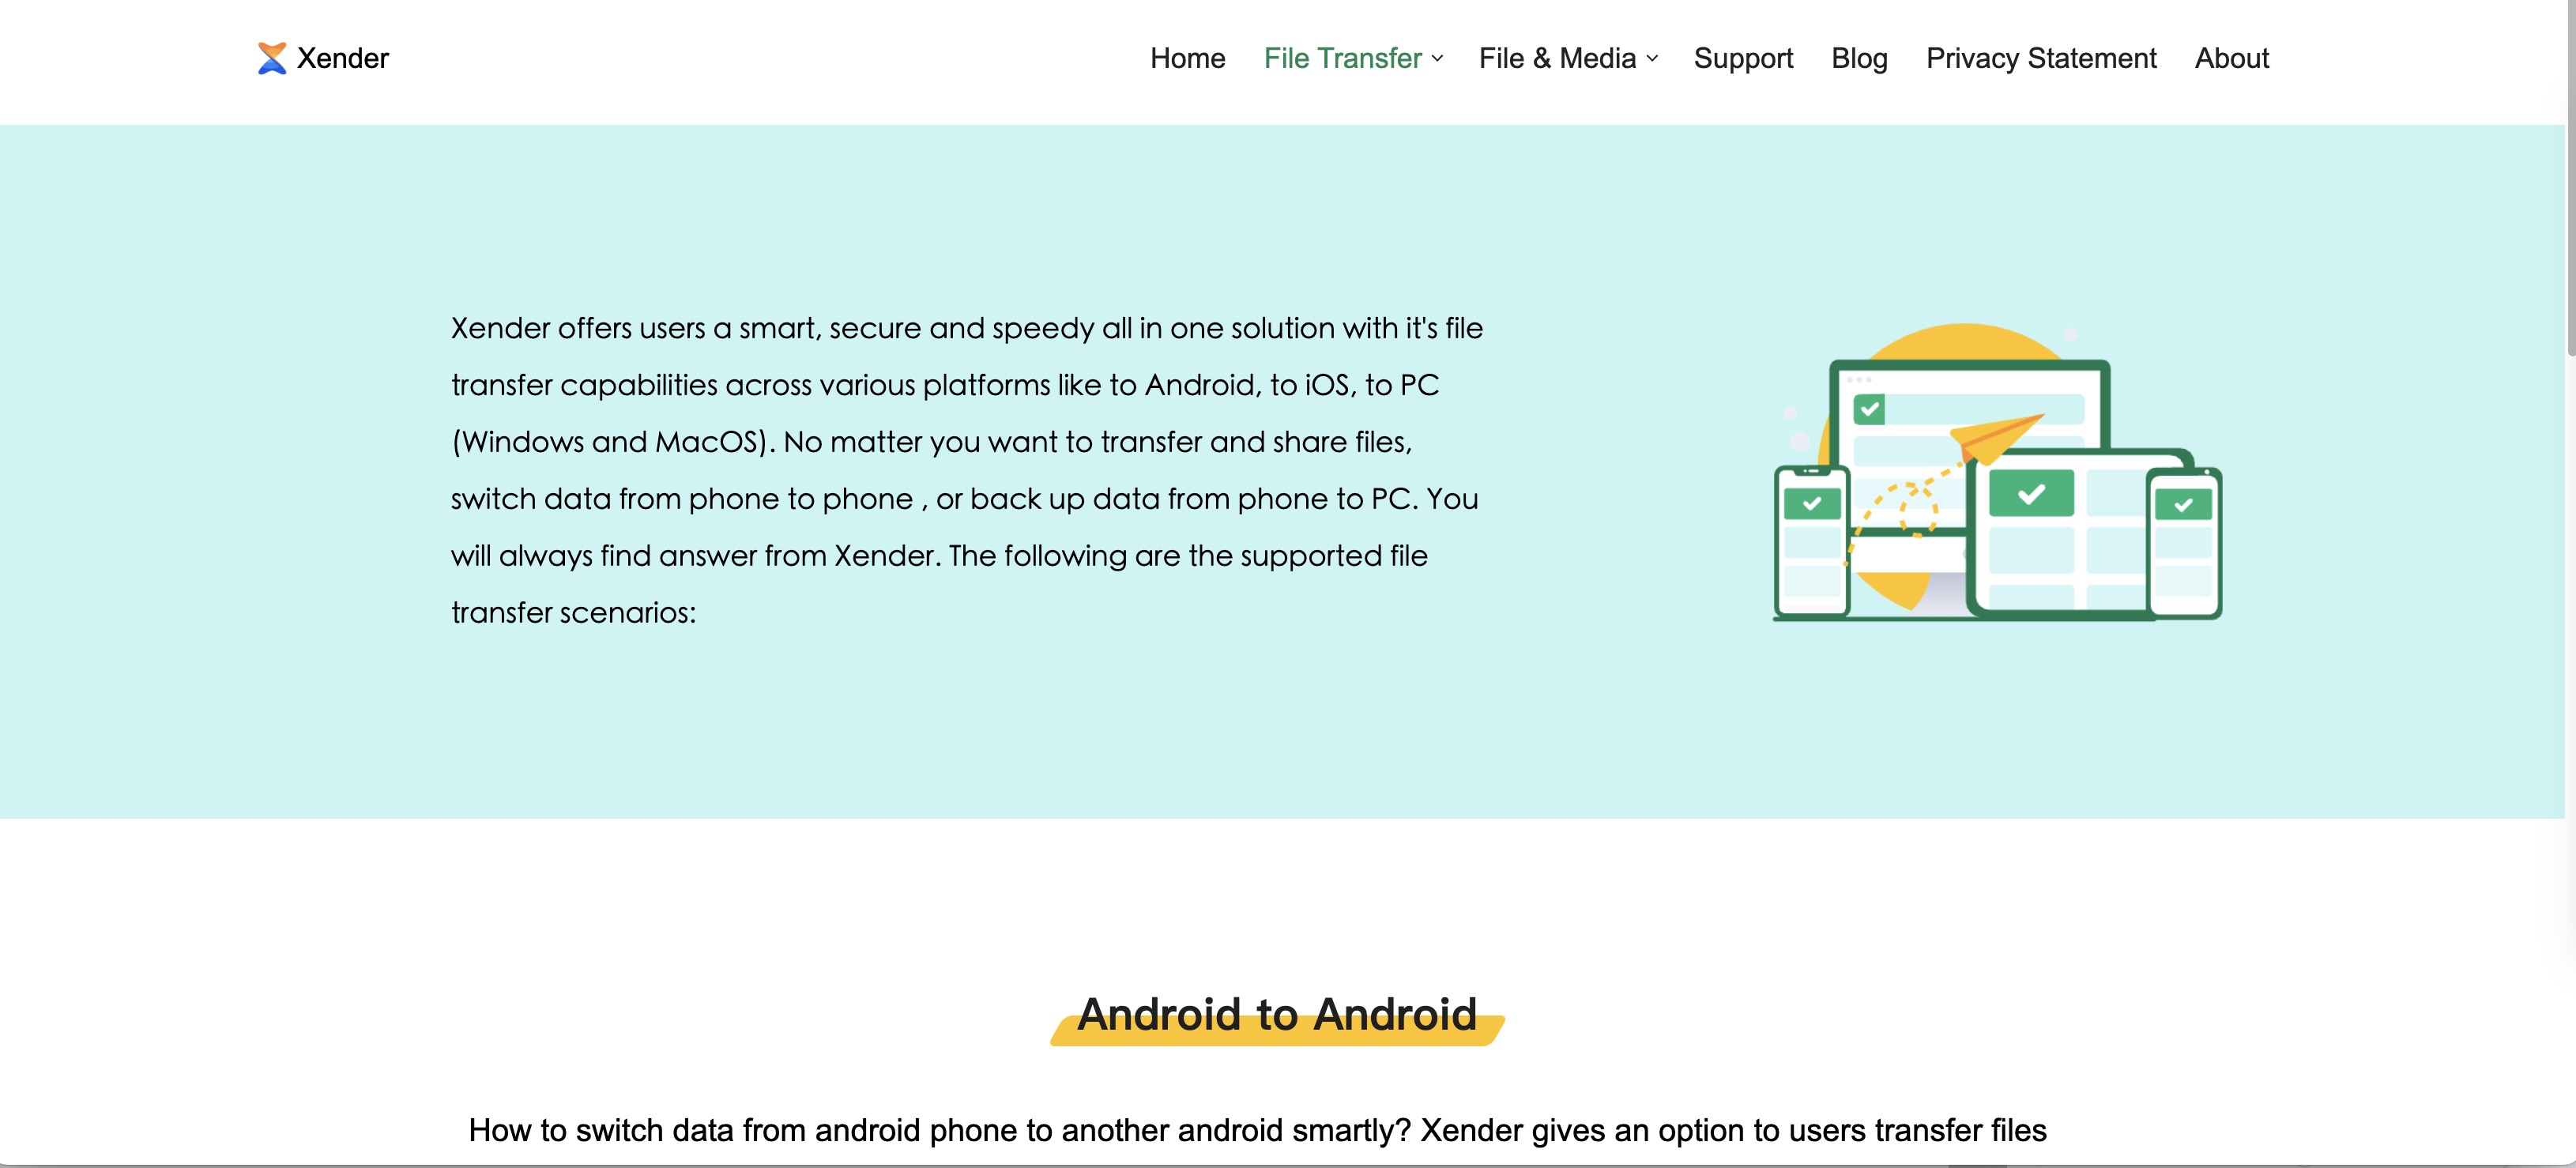 Xender website concerning Android